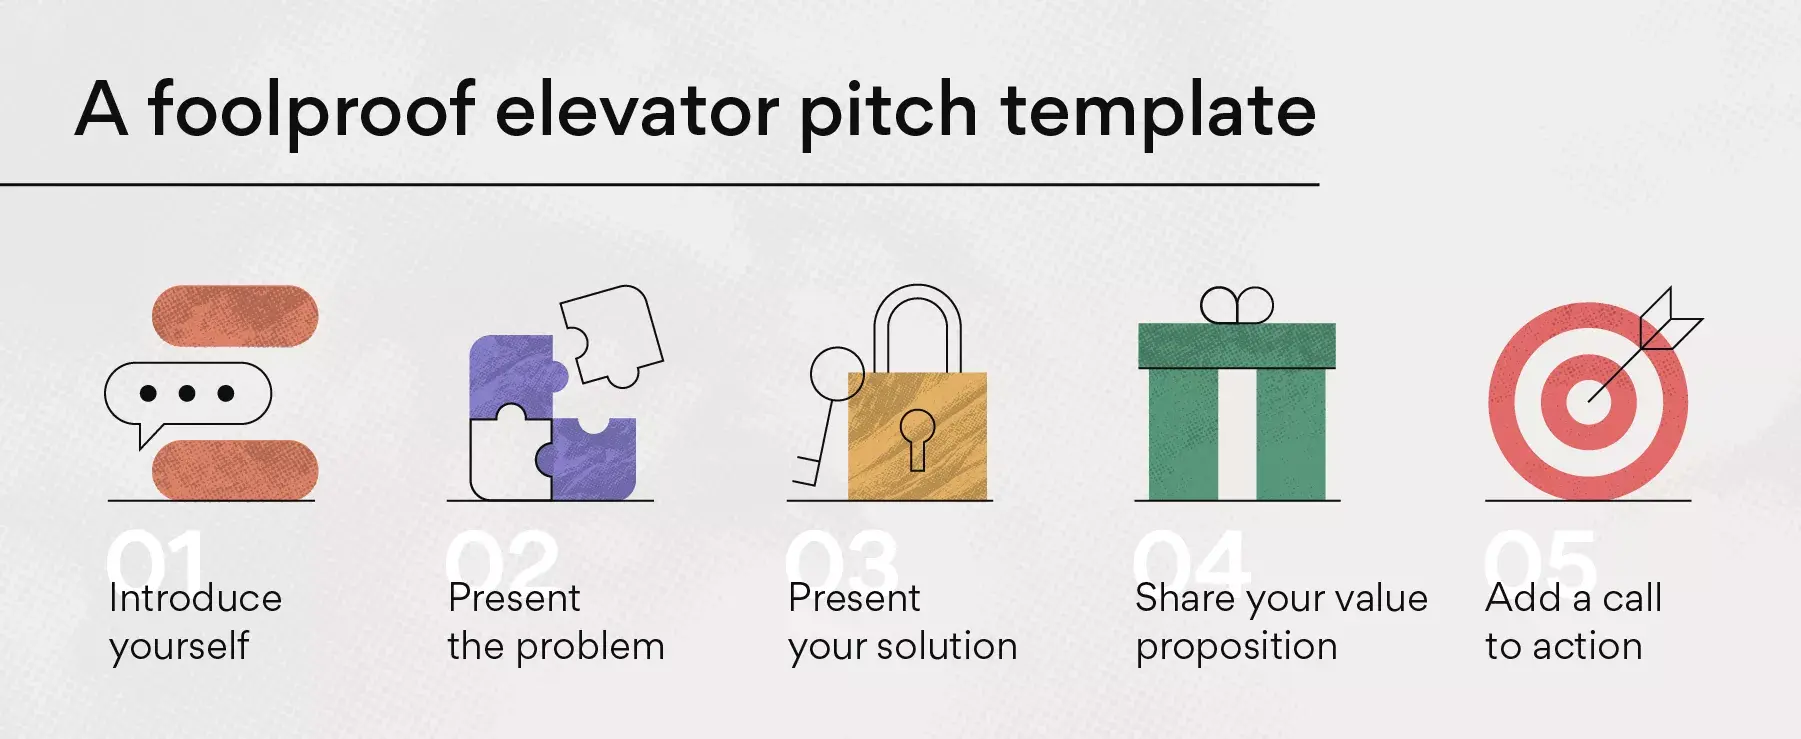 A foolproof elevator pitch template